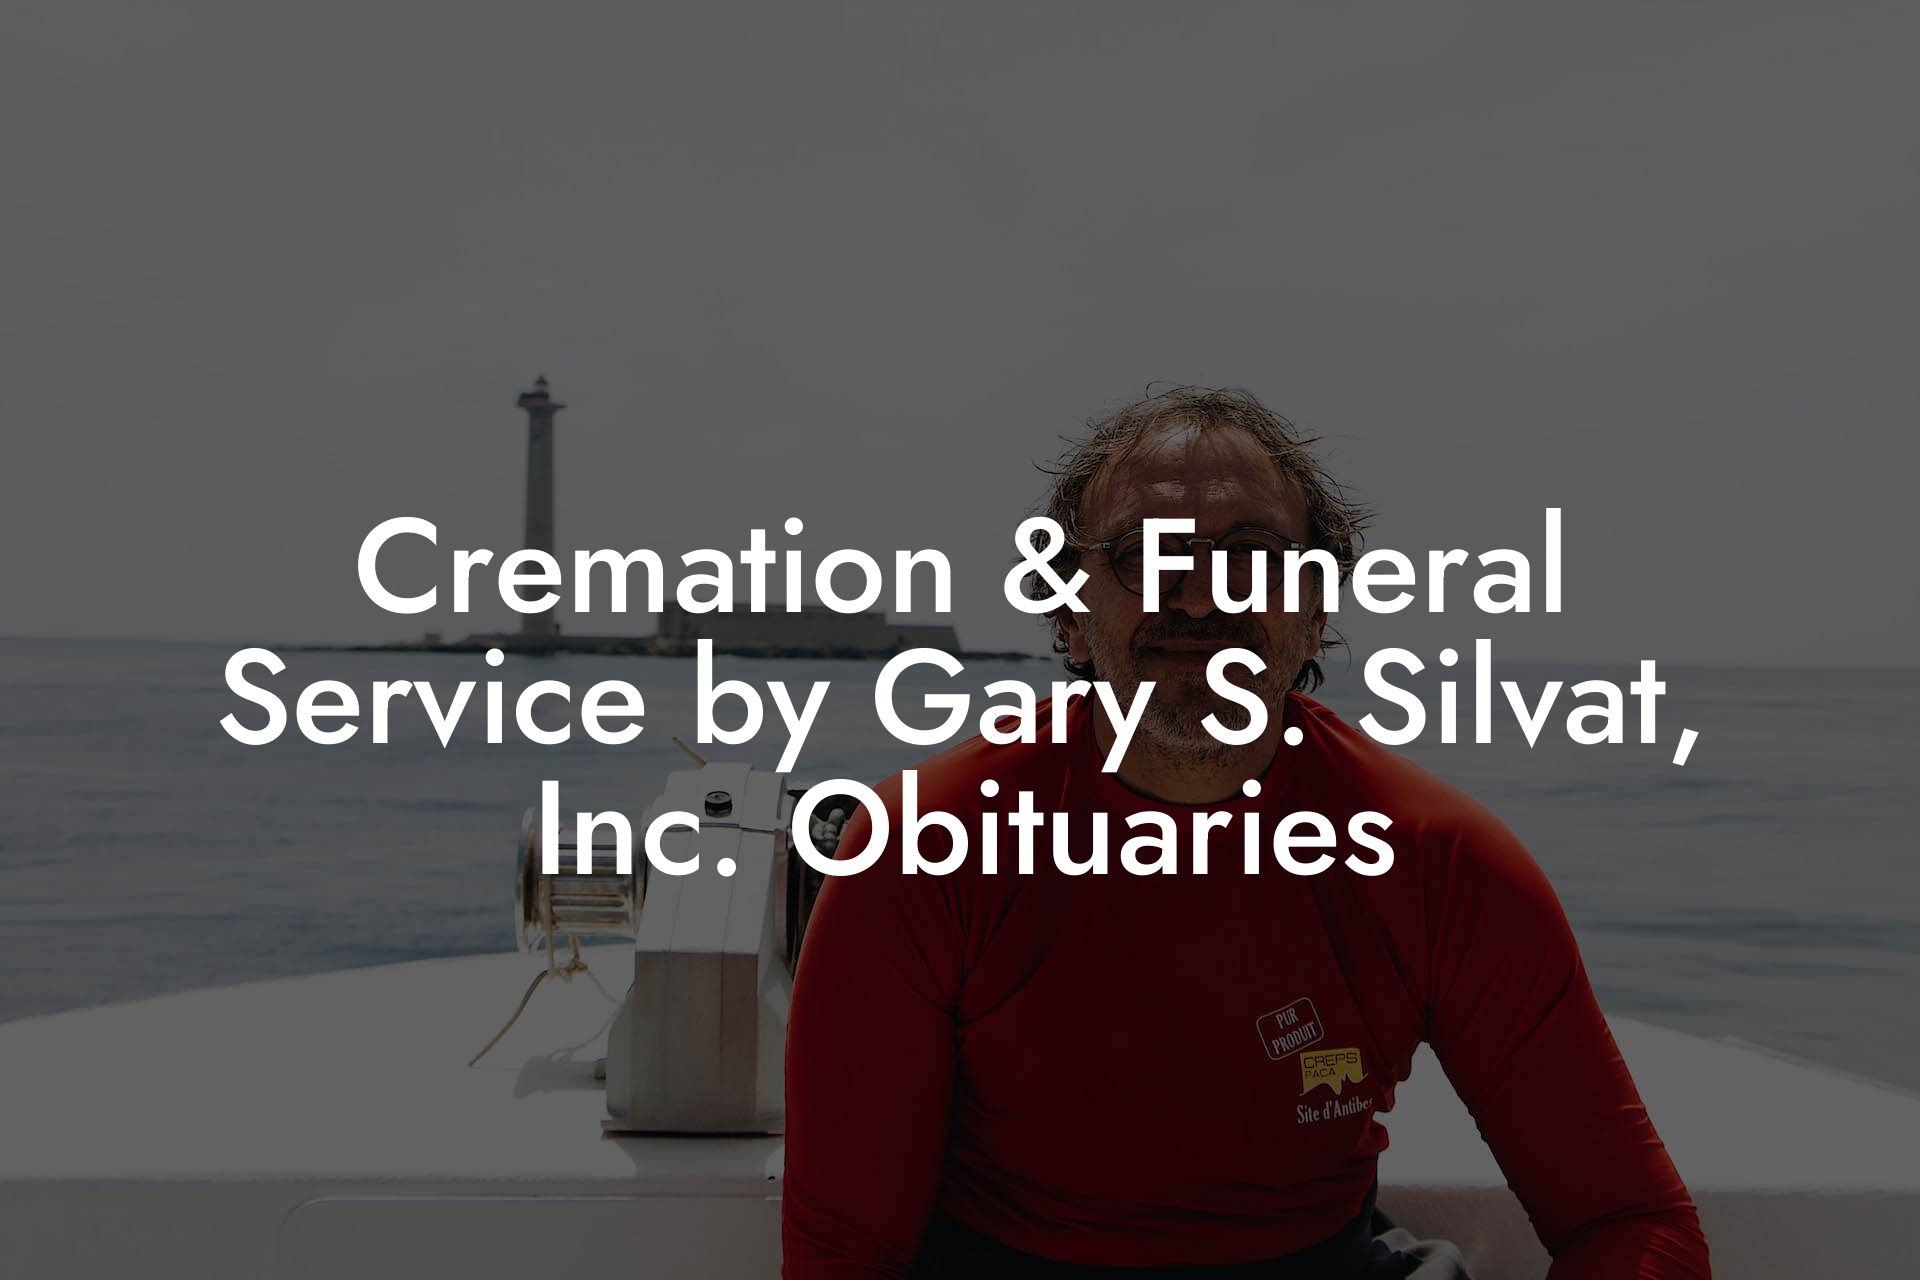 Cremation & Funeral Service by Gary S. Silvat, Inc. Obituaries